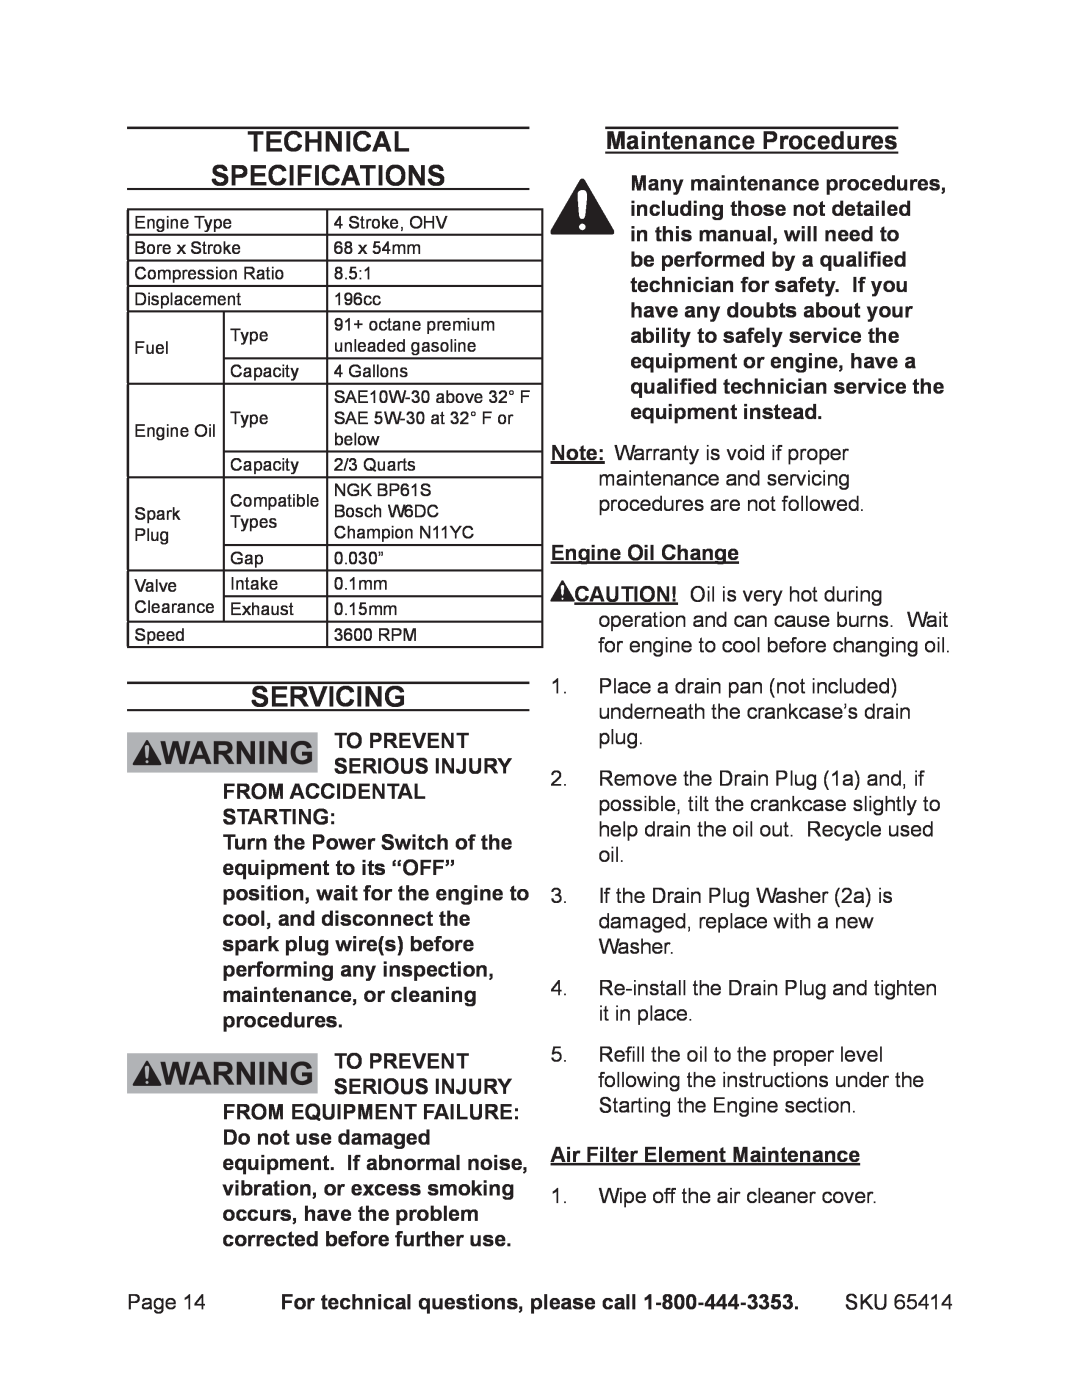 Chicago Electric 65414 manual Technical Specifications, Servicing, To prevent serious injury from accidental starting 